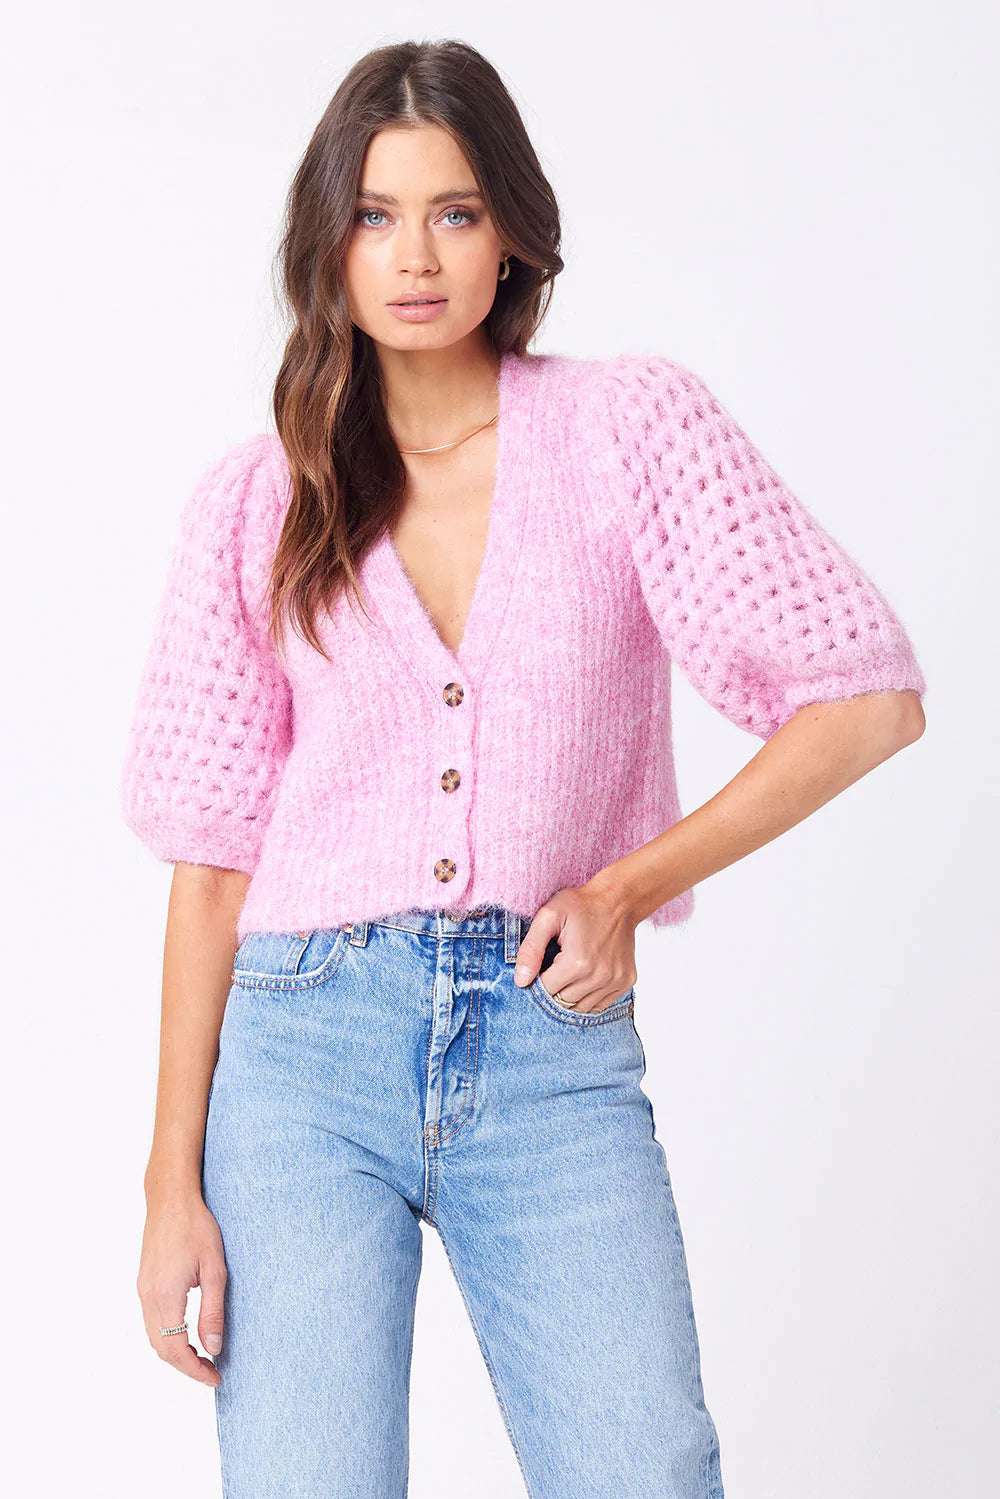 Elyse Sweater-Party Pink